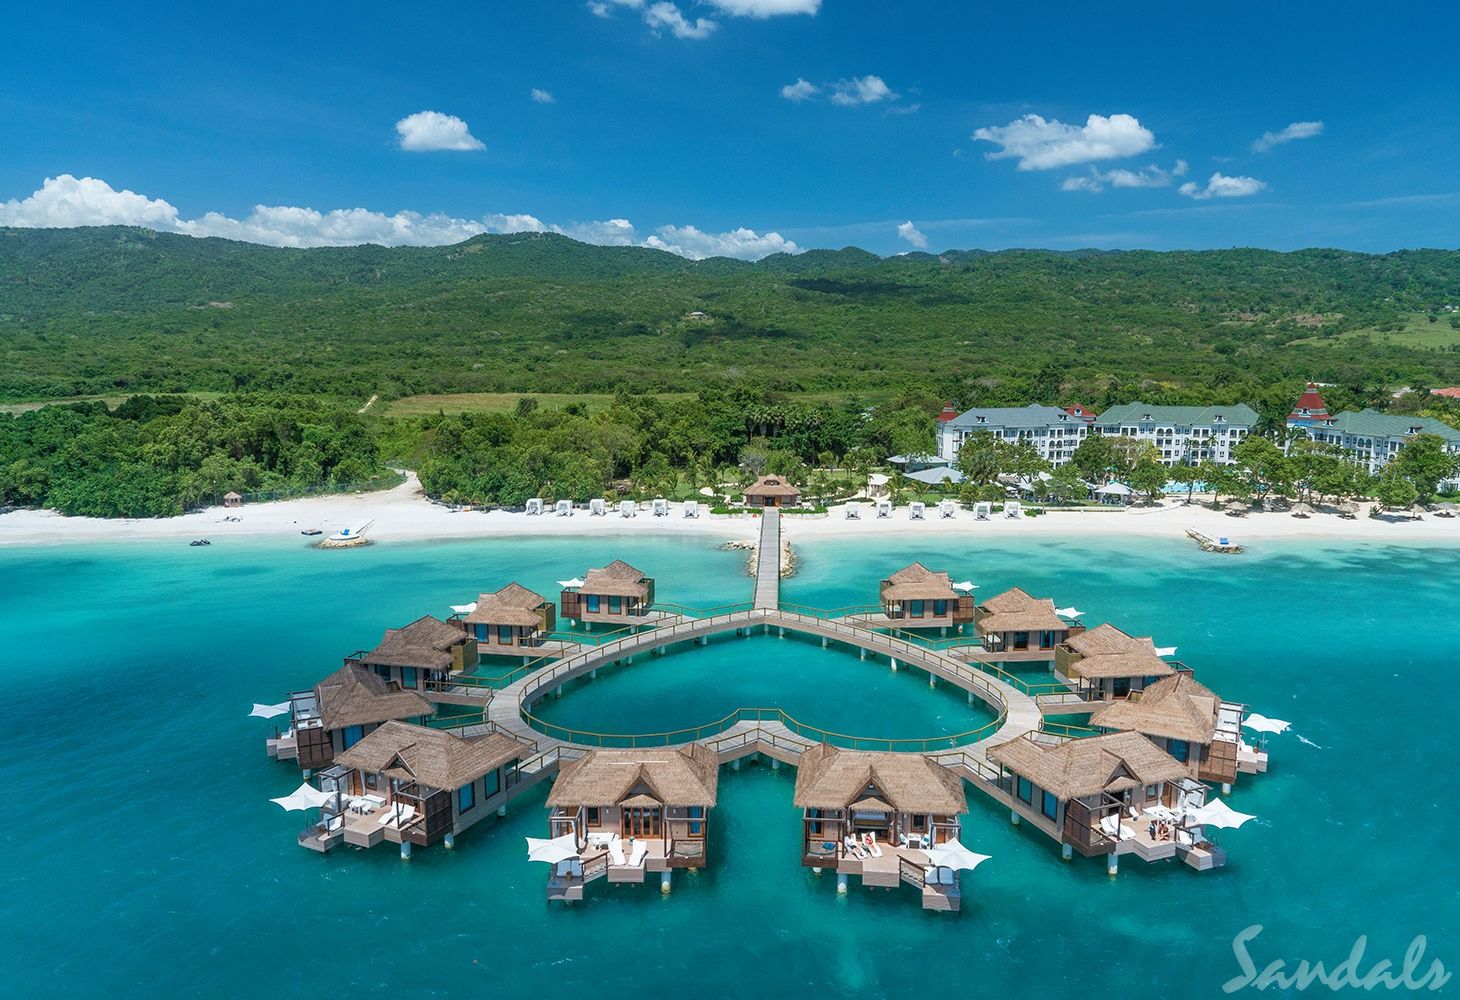 Sandals overwater heart bungalows